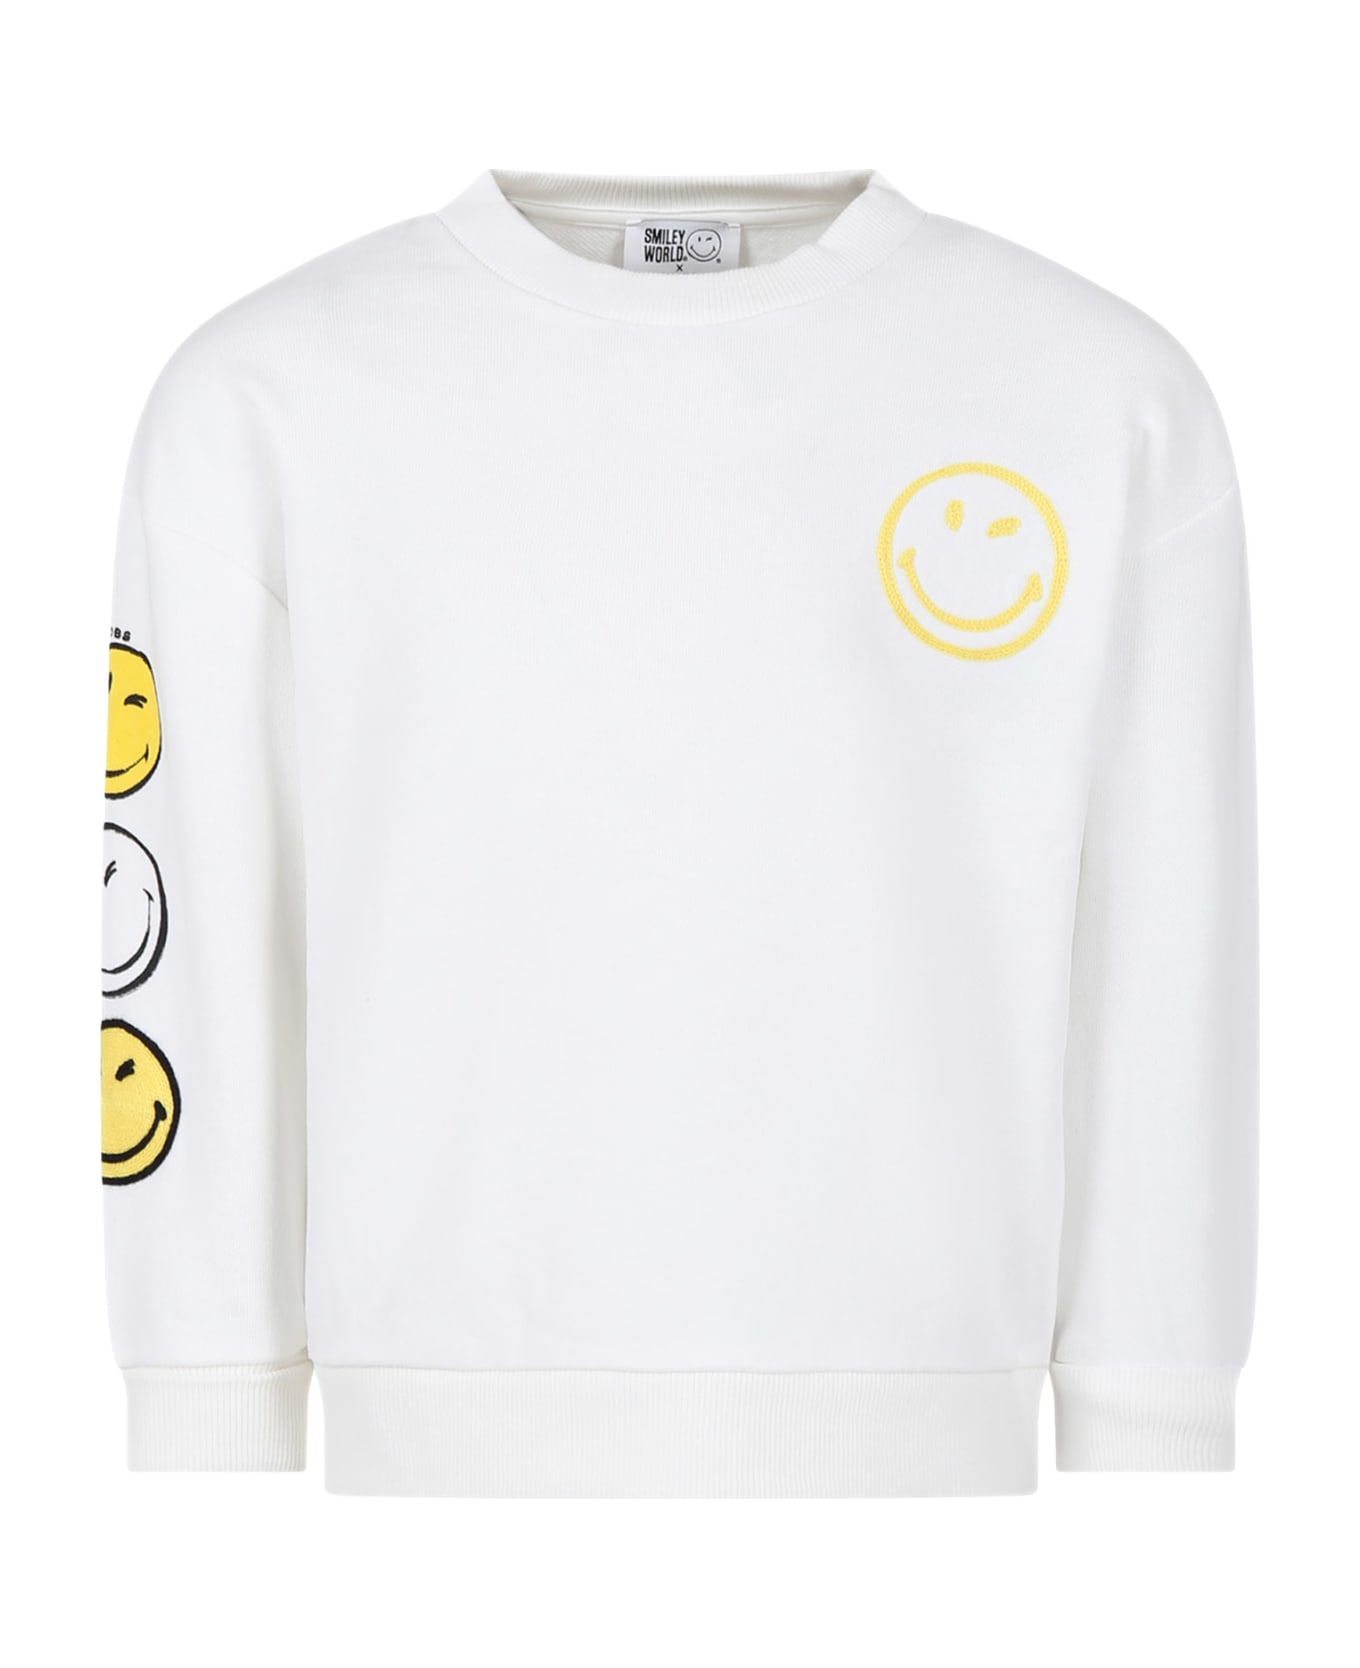 Marc Jacobs White Sweatshirt For Boy With Smiley And Logo - White